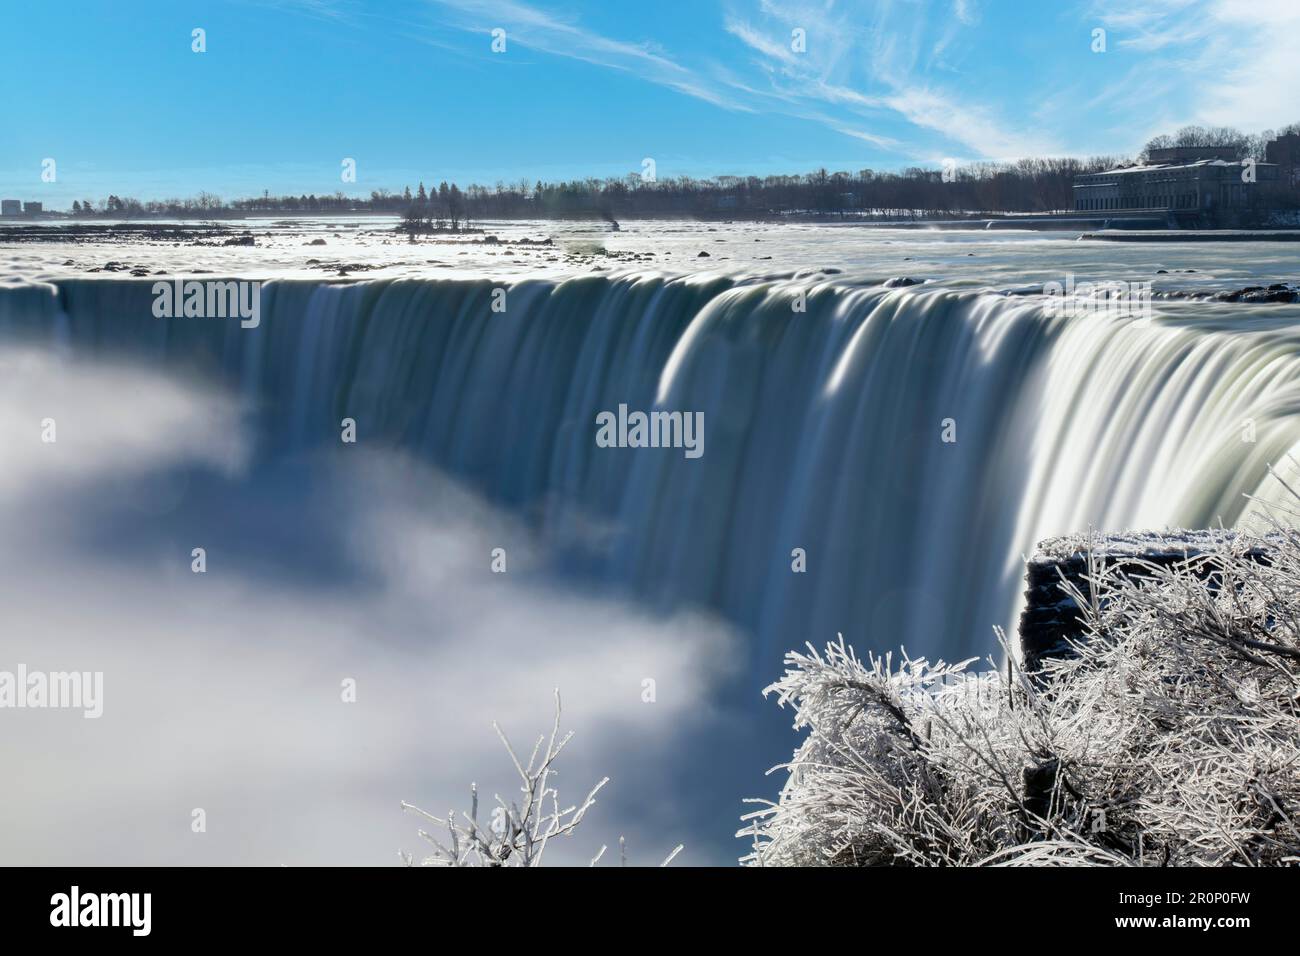 Panoramic view over the Niagara Falls, ON, Canada during winter with smooth slow shutter speed water flow from the falls and white ice on the bushes Stock Photo